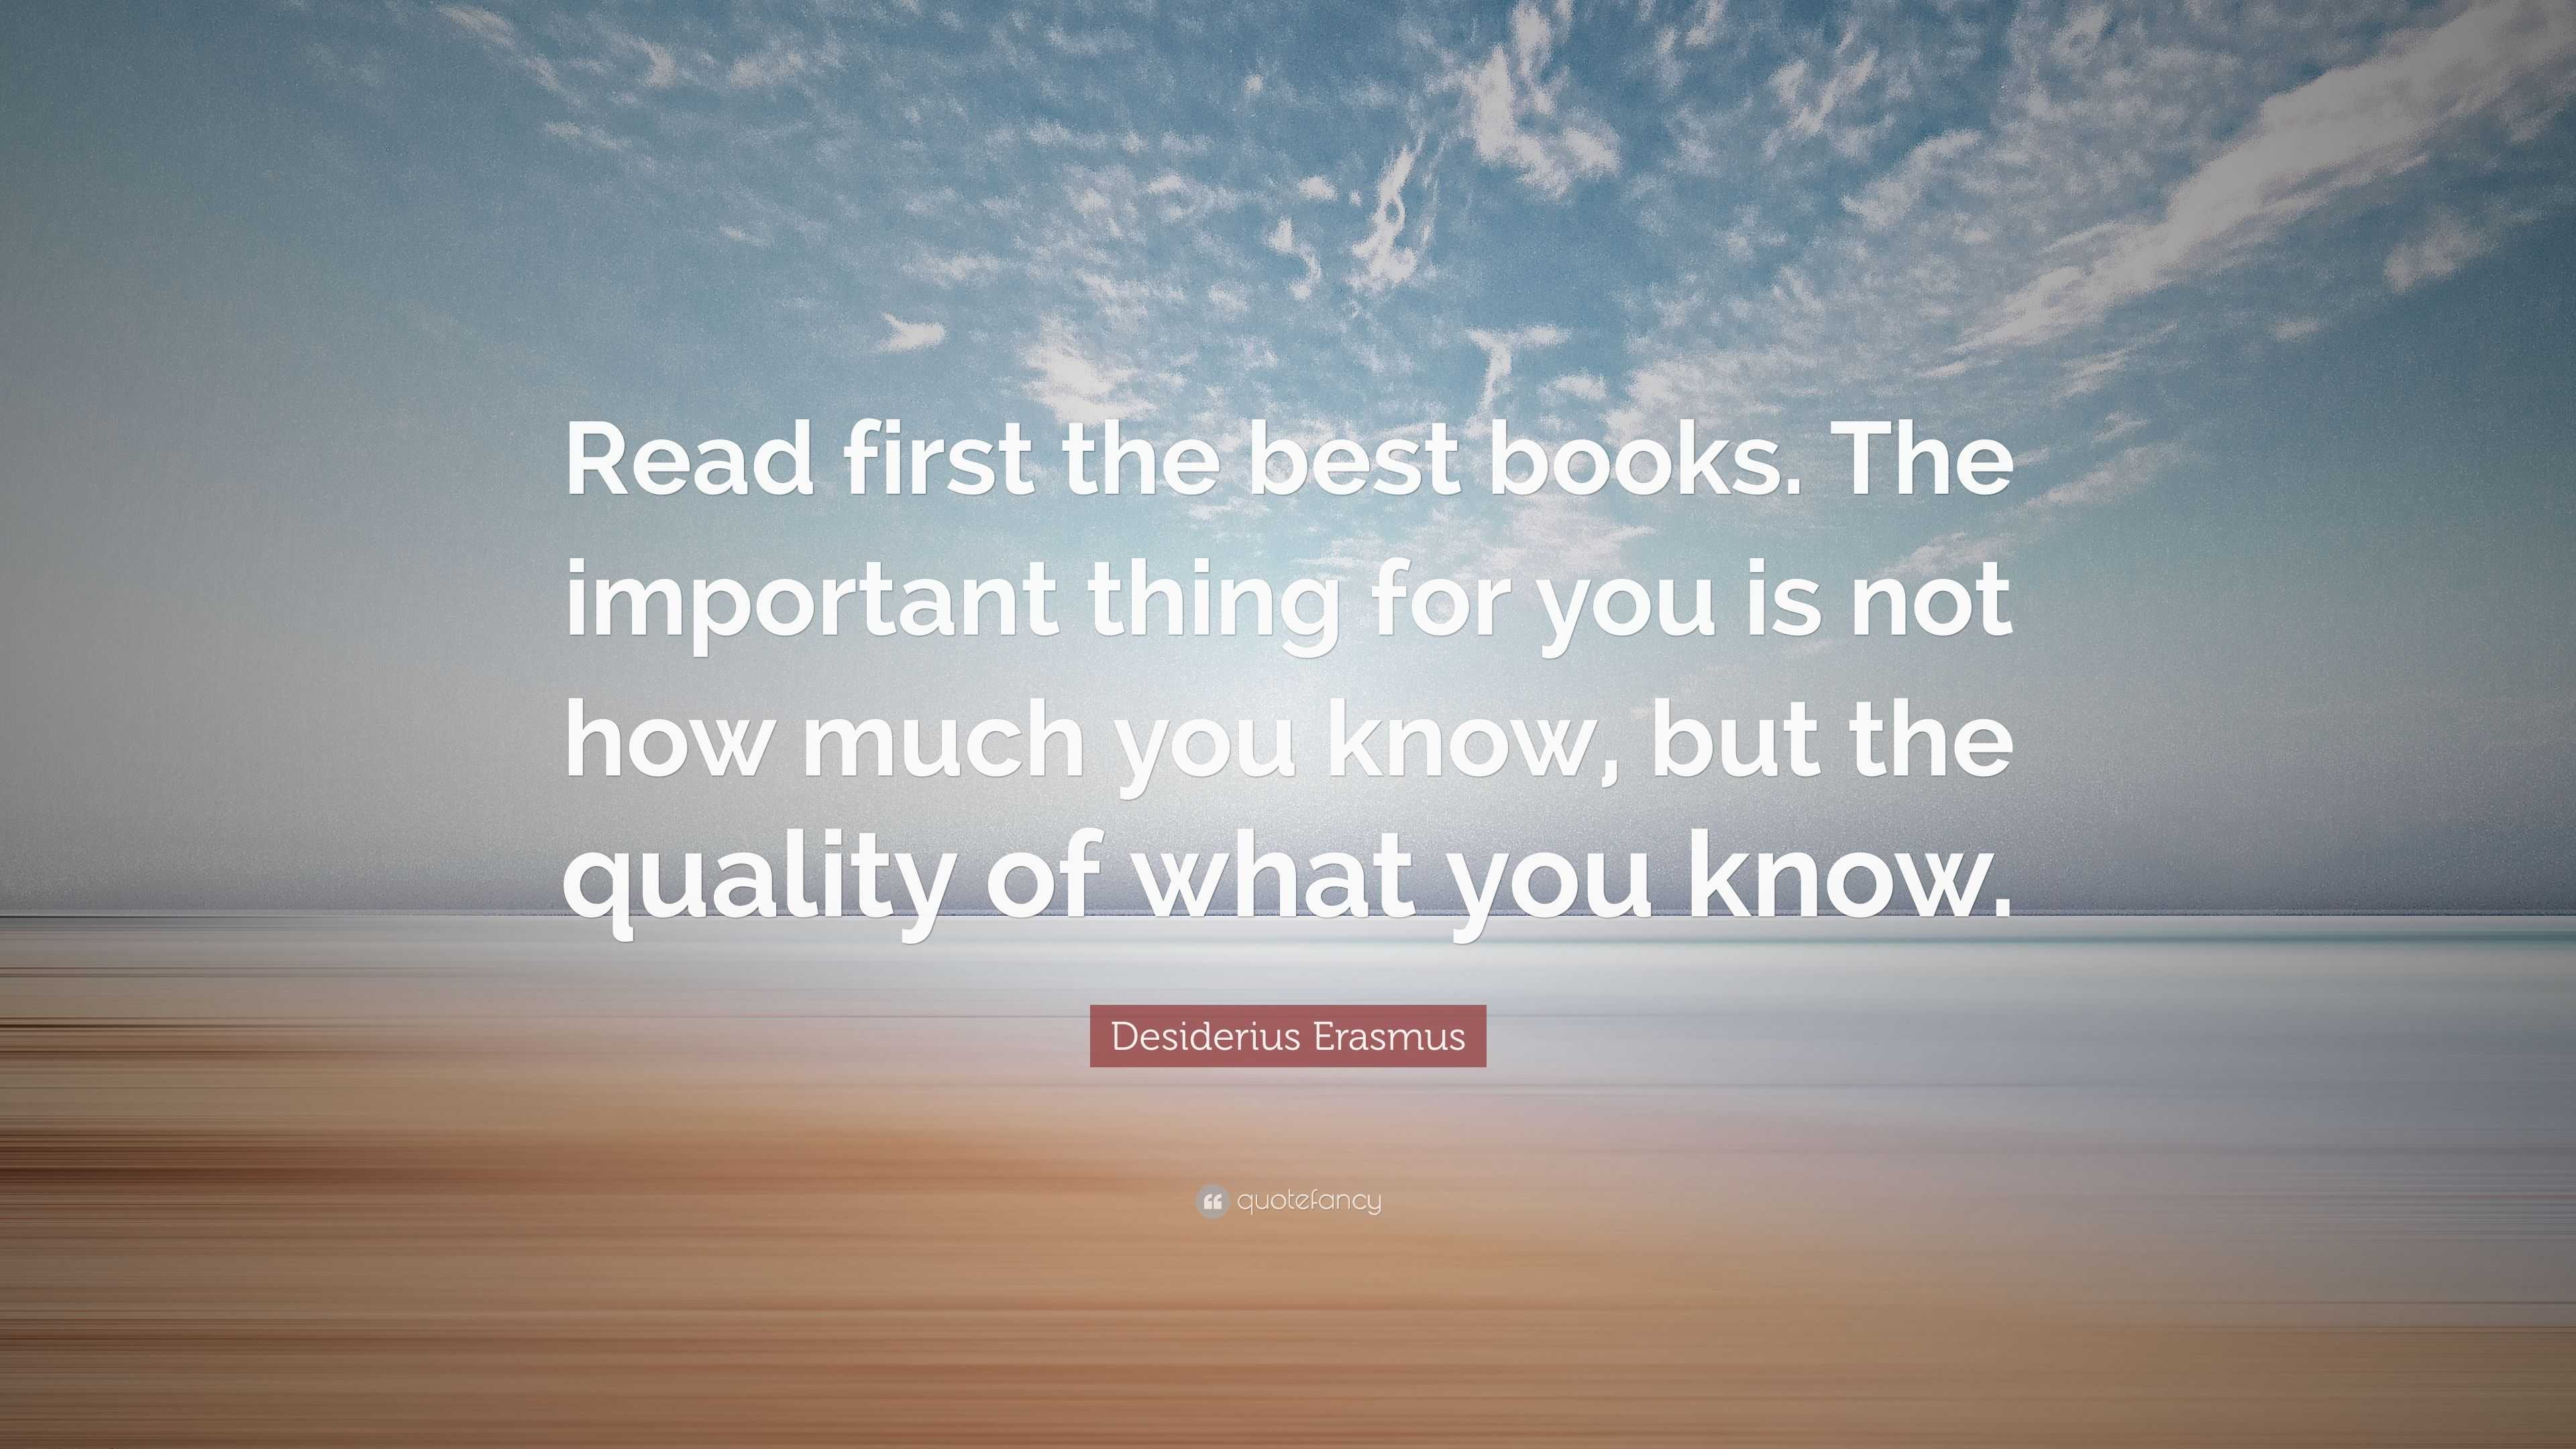 Desiderius Erasmus Quote: “Read first the best books. The important